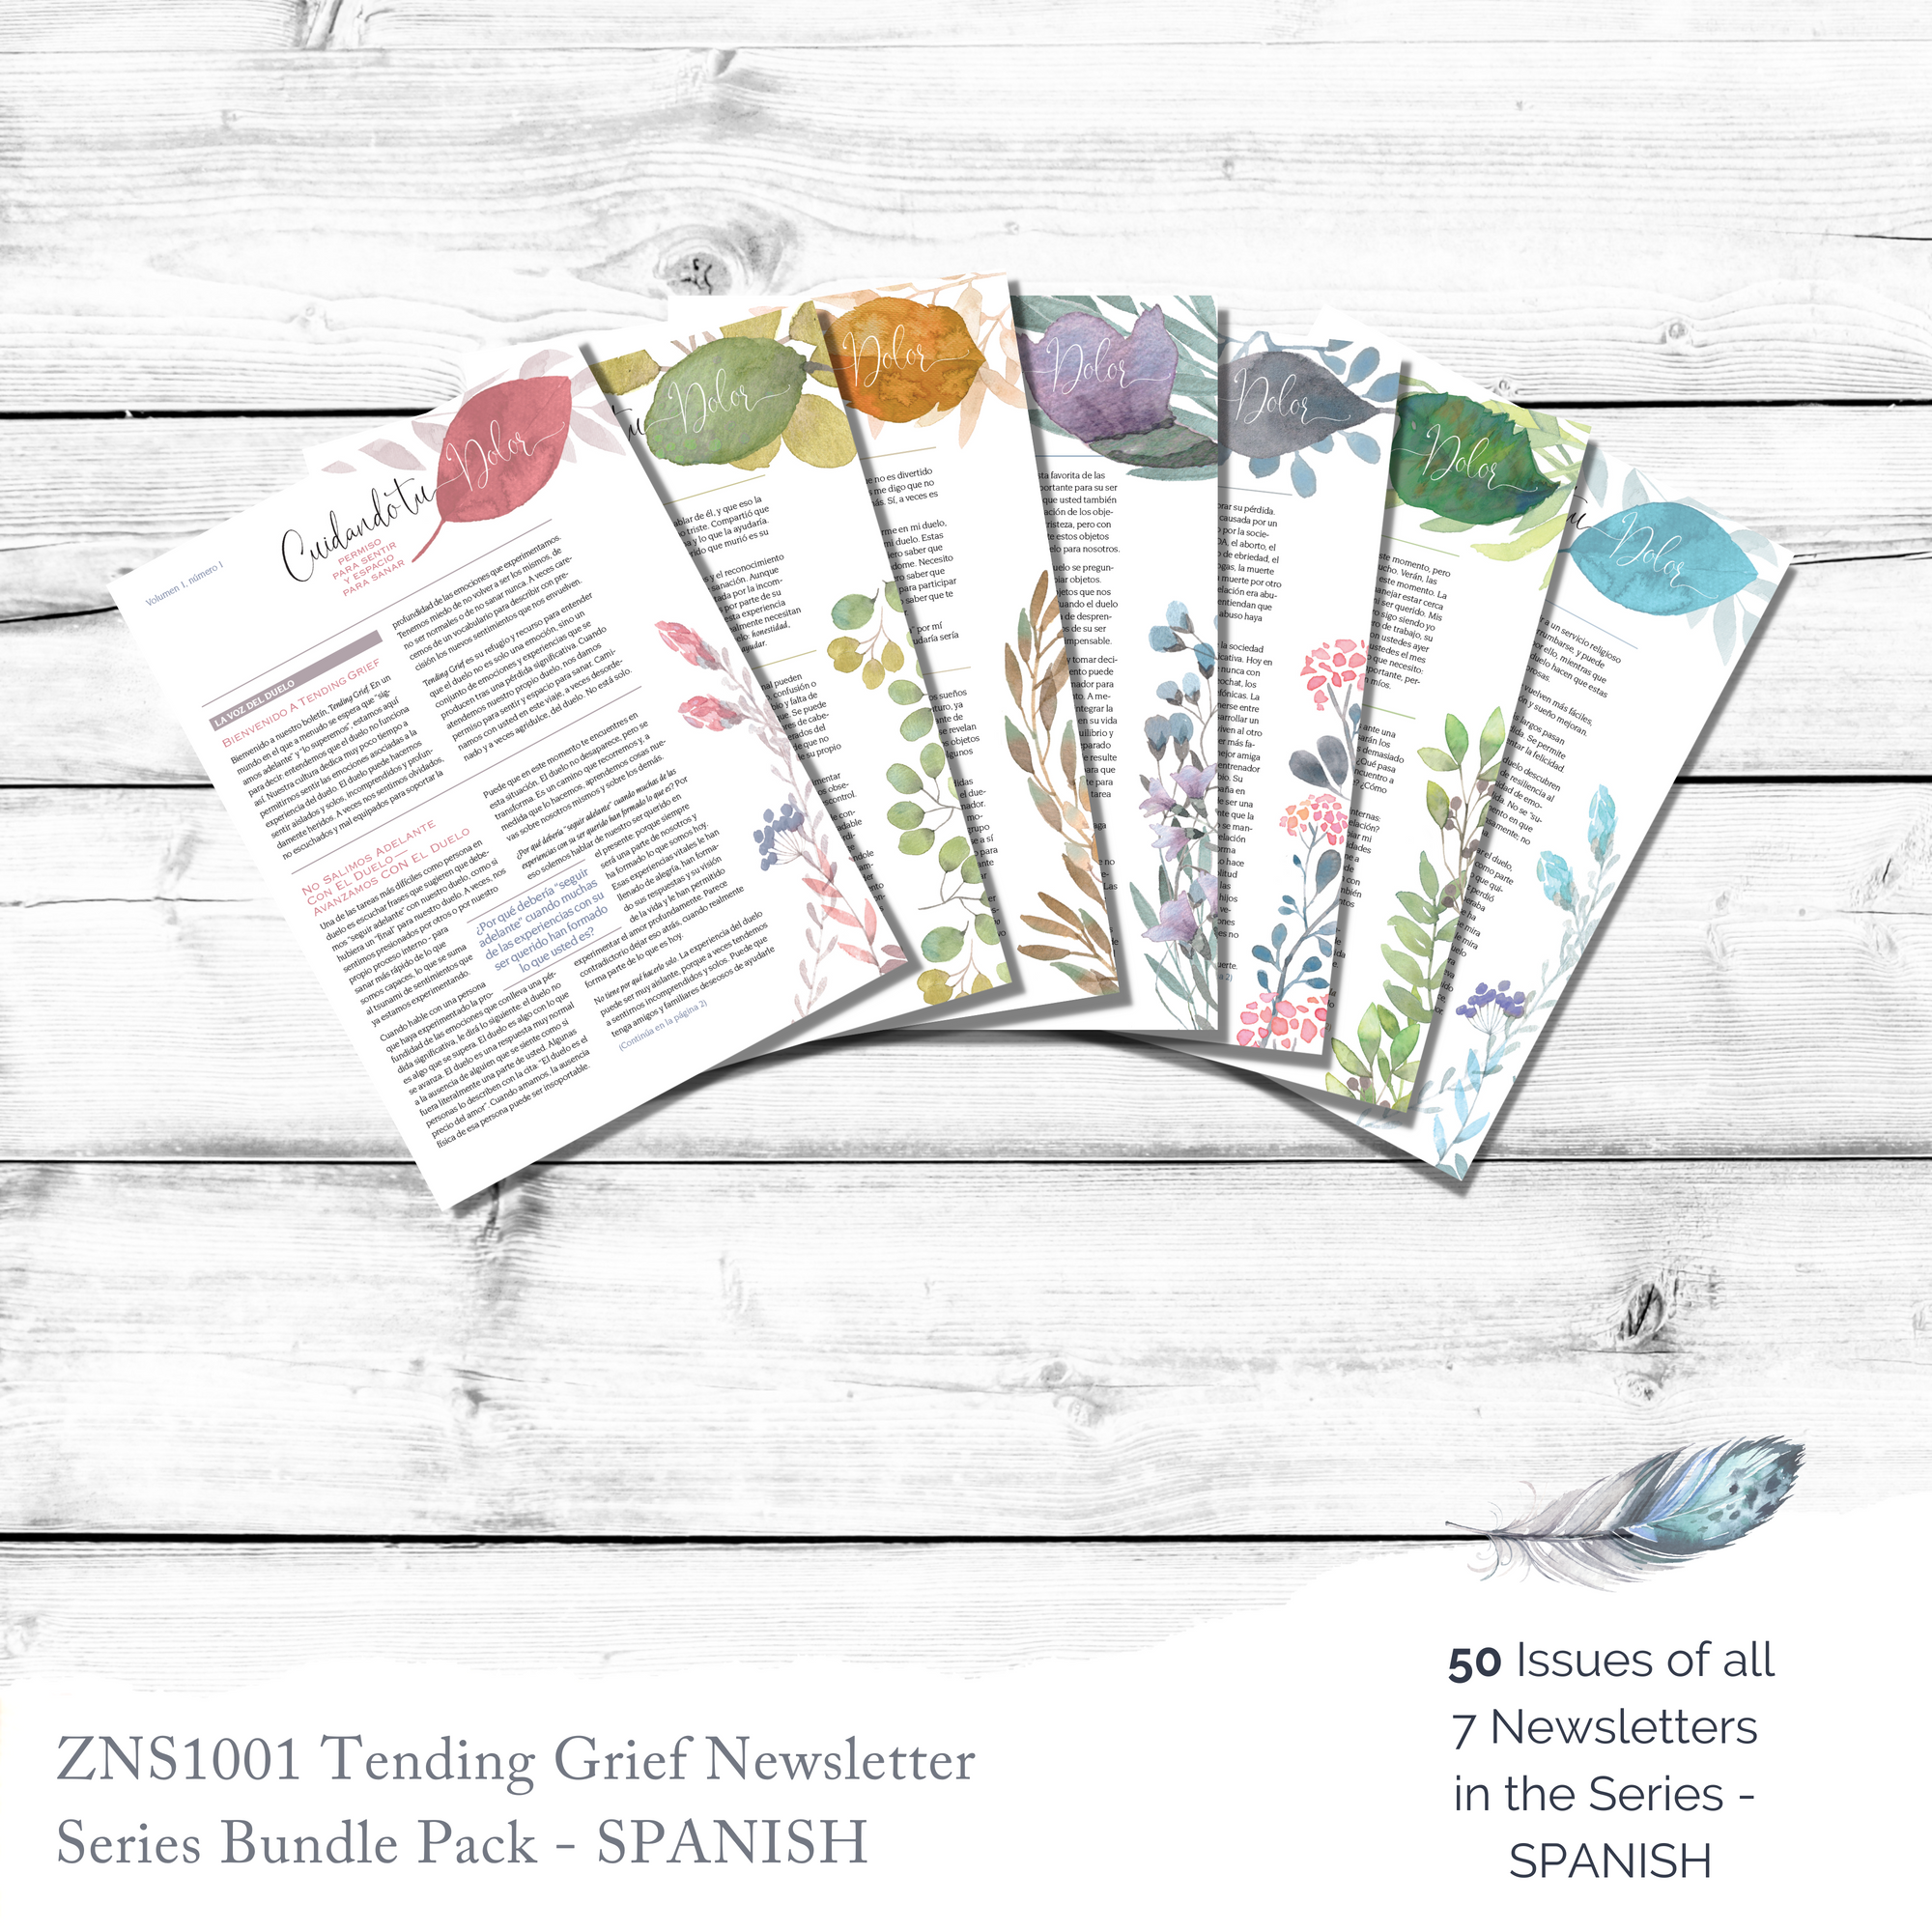 ZNS1001 | SPANISH Tending Grief Newsletter Series Bundle Pack (50 issues of all 7 issues in series)